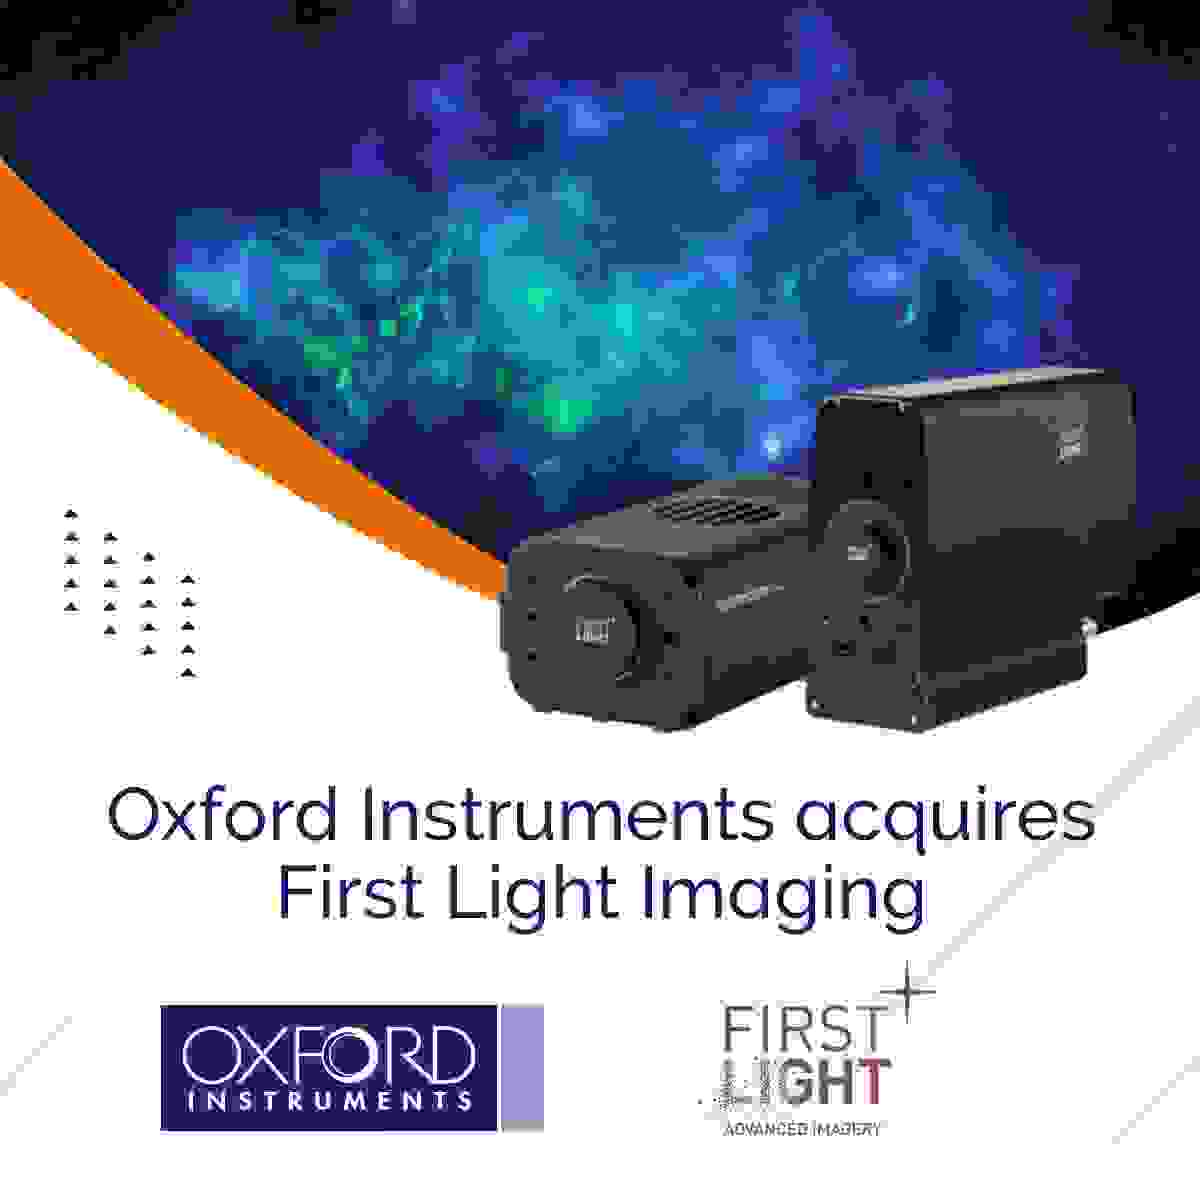 Oxford Instruments acquires First Light Imaging